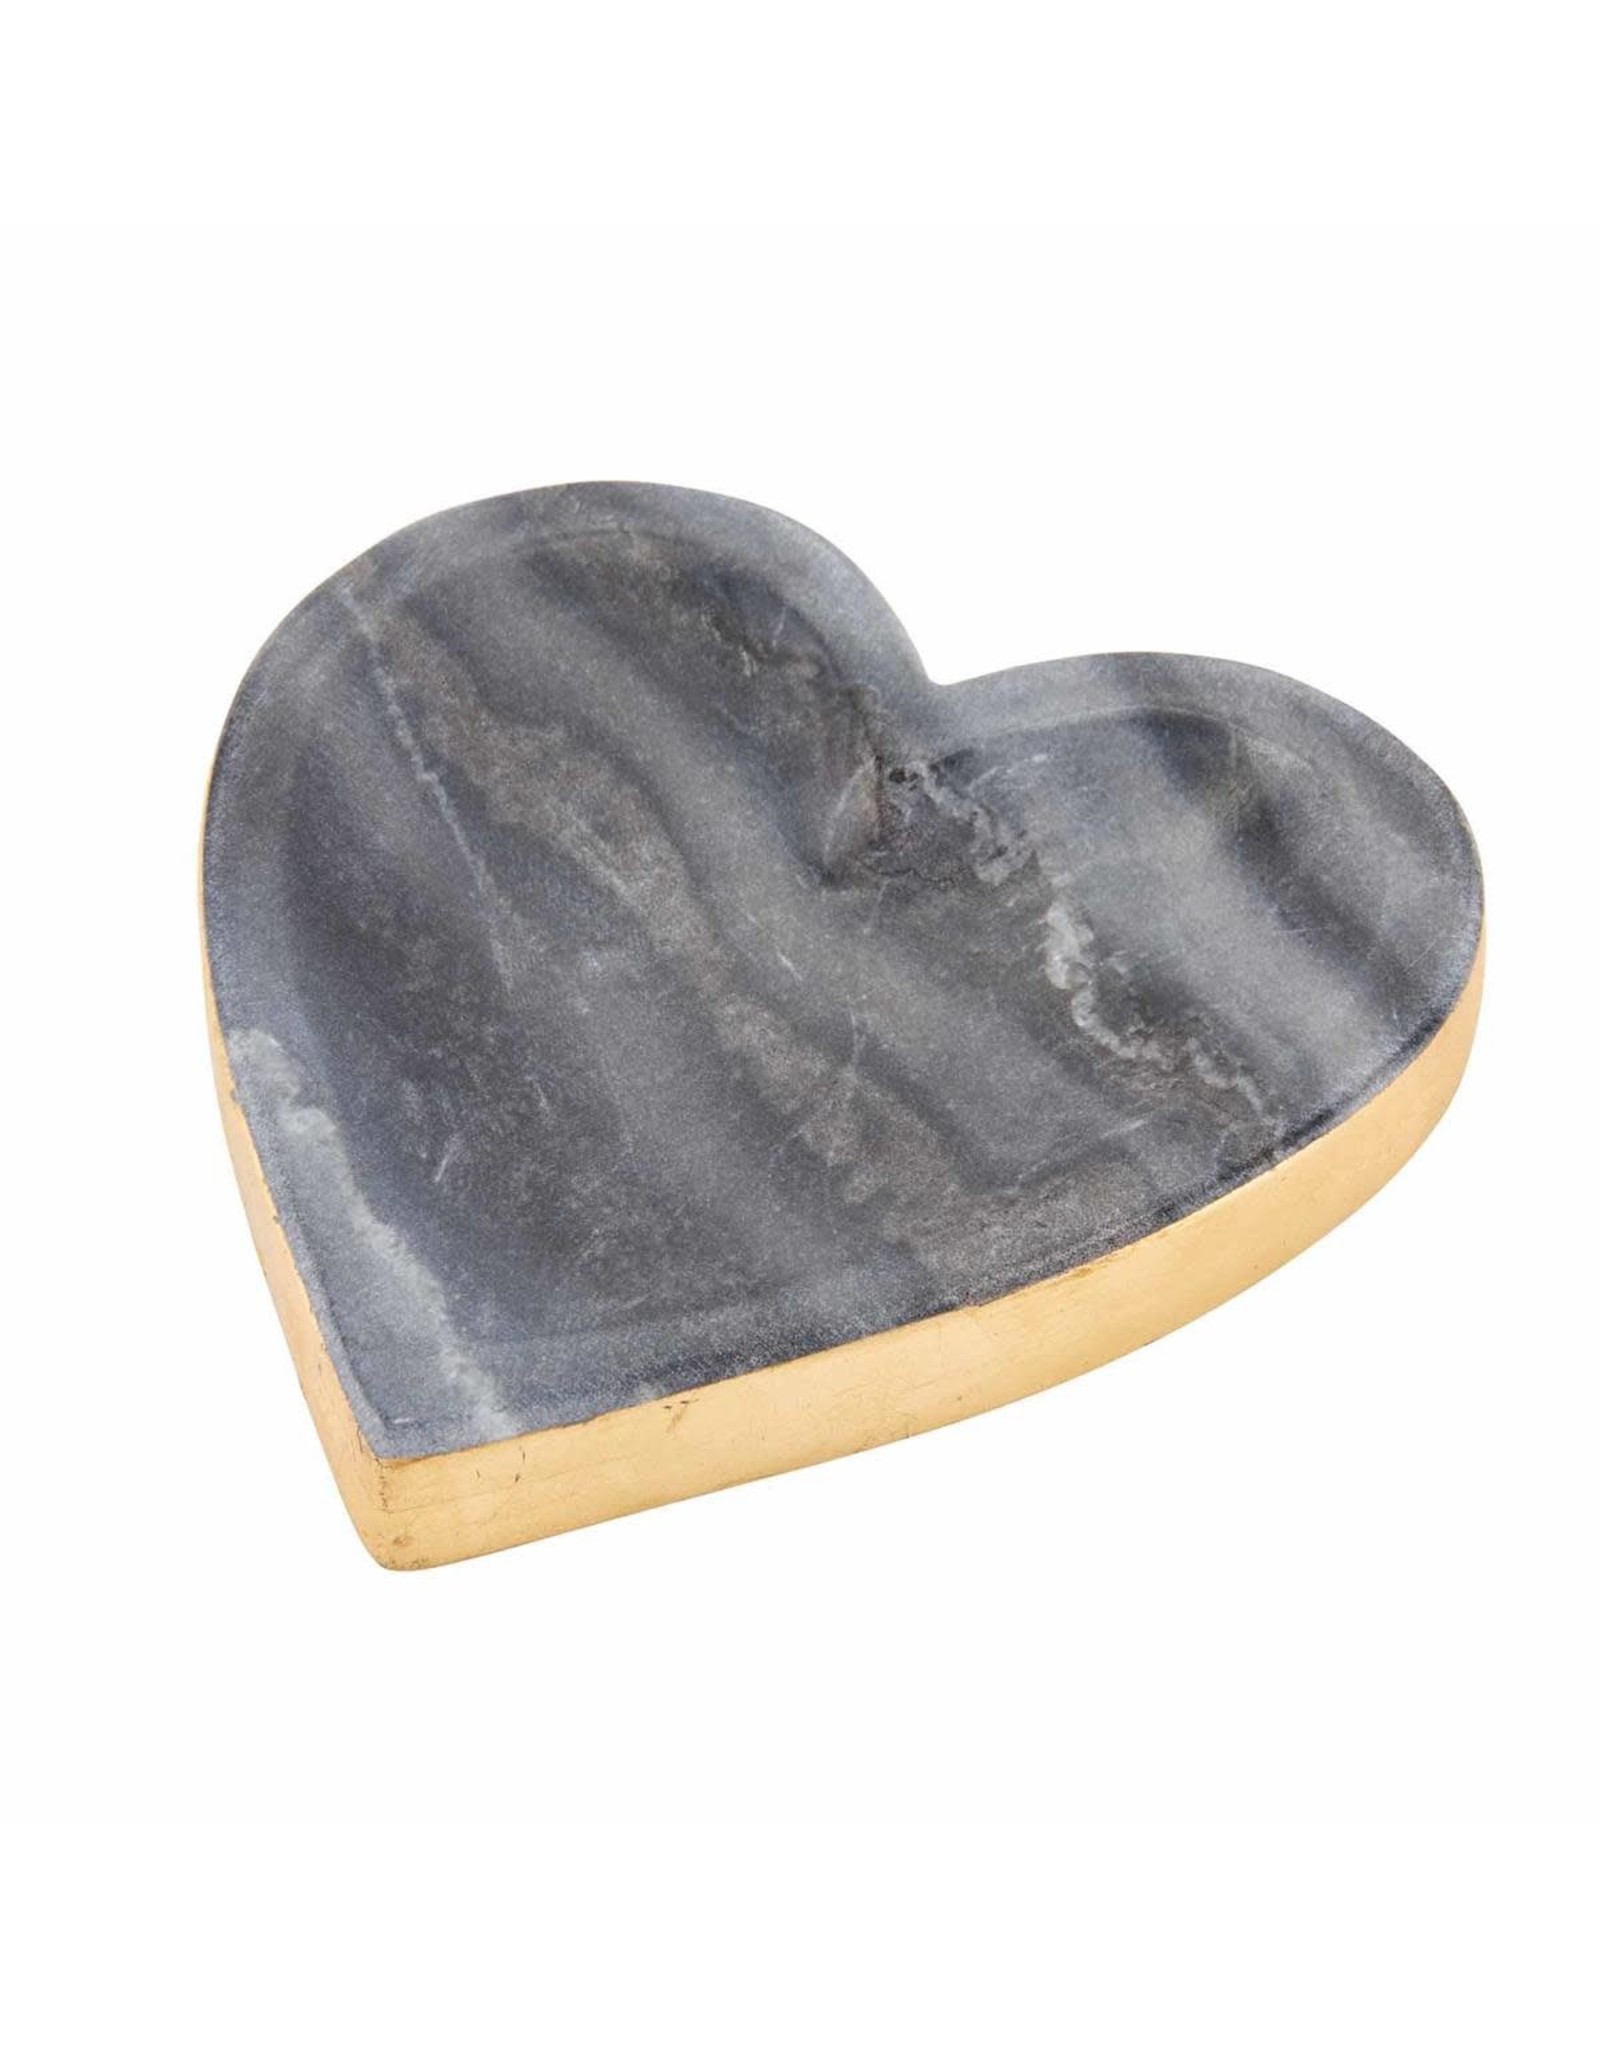 Mud Pie Gray Marble Foil Heart Tray Trinket Ring Dish Gold Edge